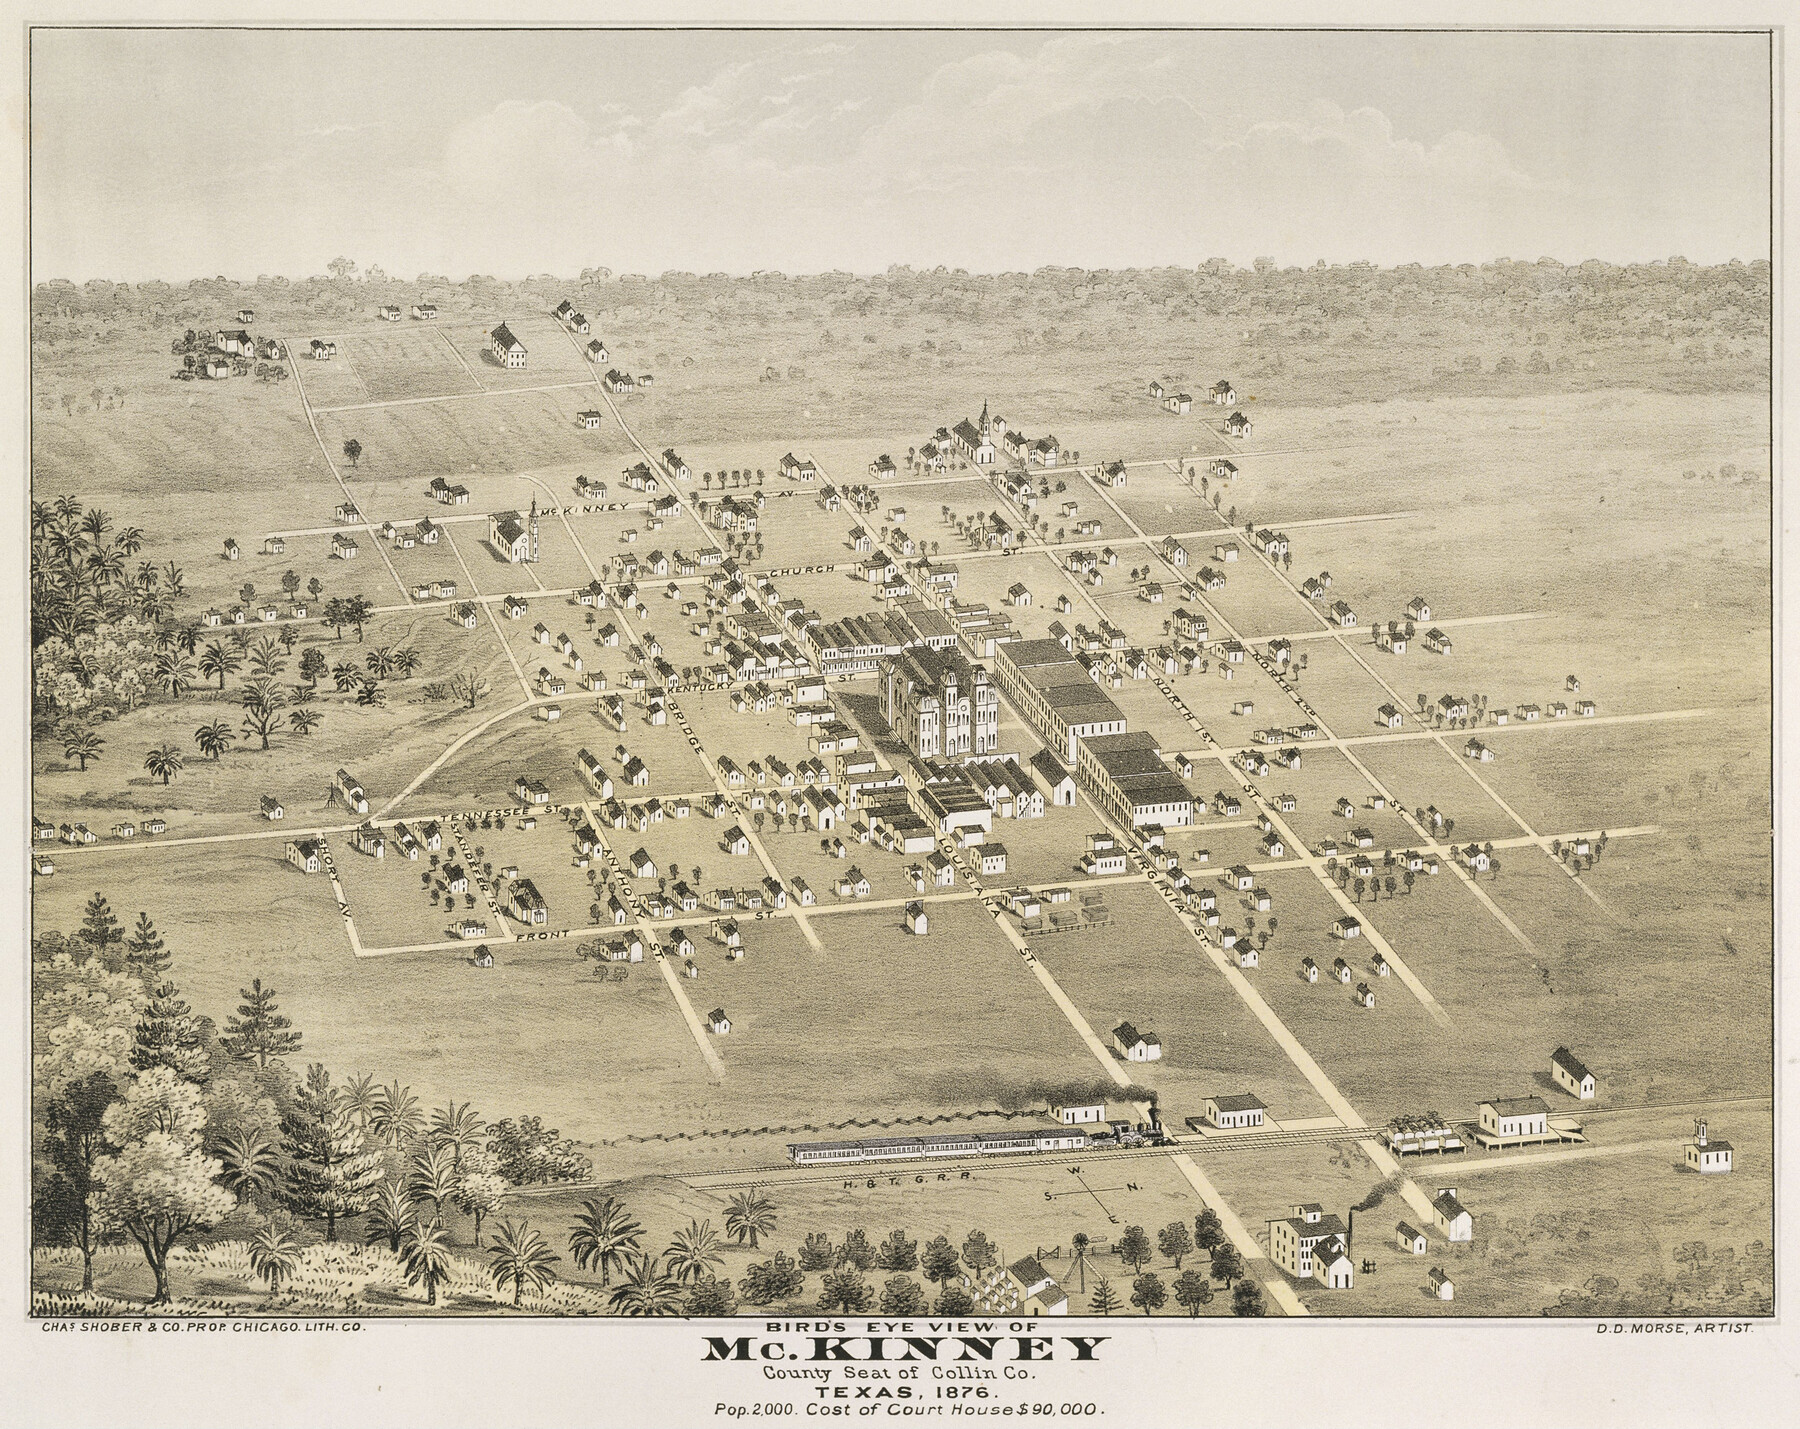 89099, Bird's Eye View of McKinney, County Seat of Collin Co[unty], Texas, Non-GLO Digital Images